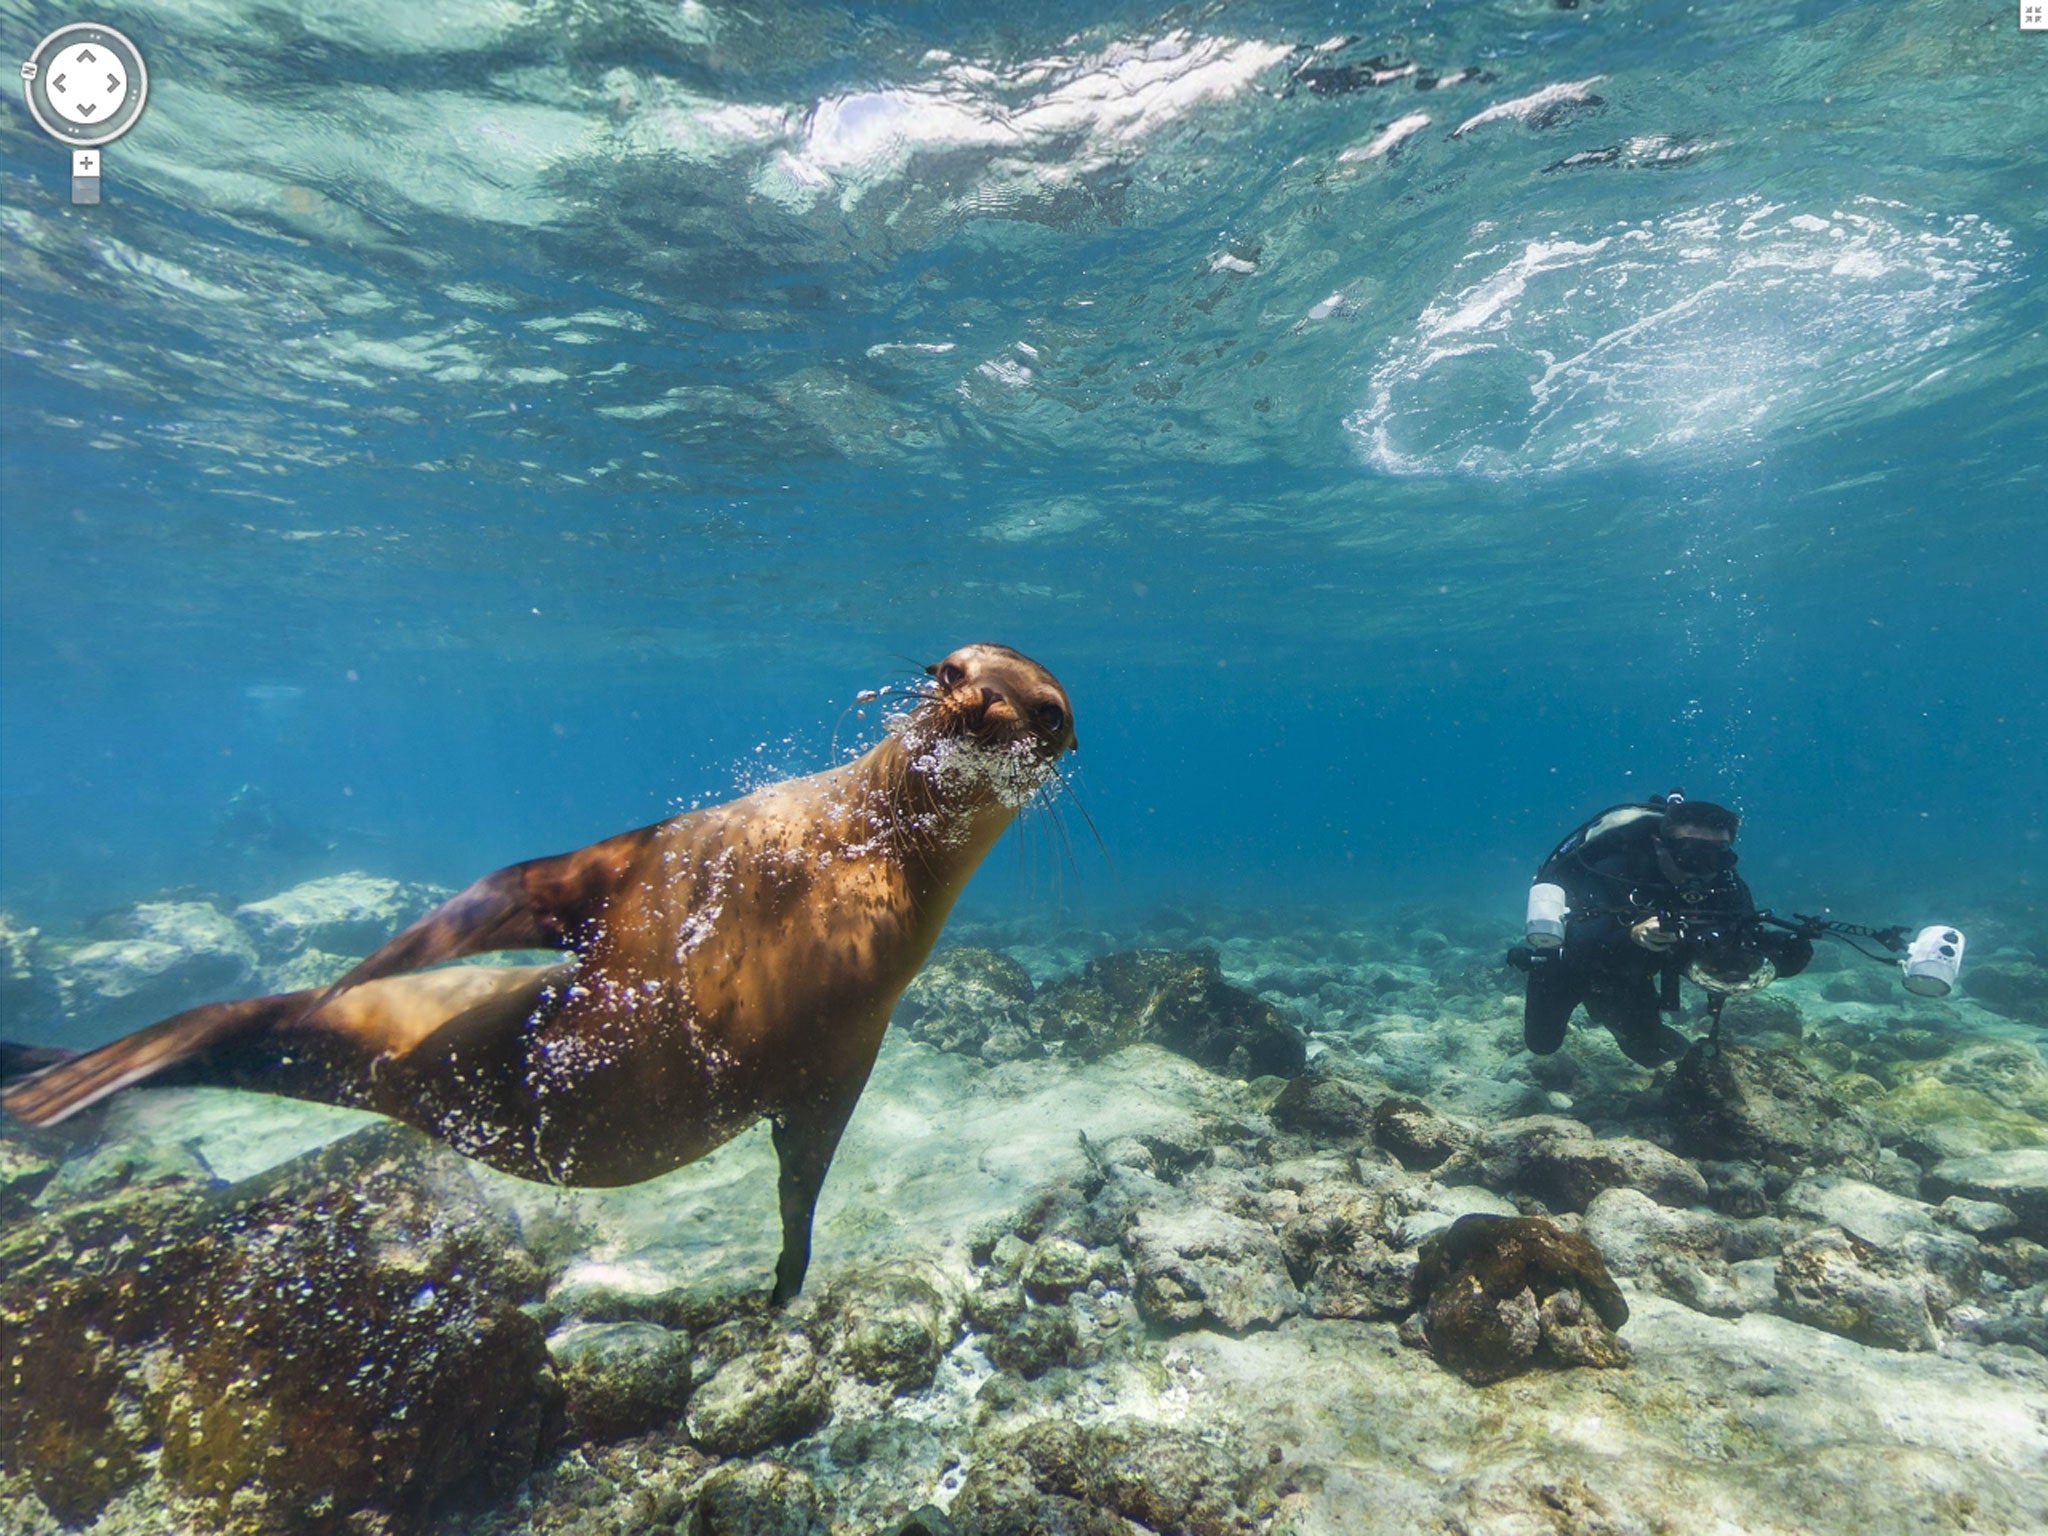 The Galapagos Islands have been put on Google Street View for the first time, allowing users to 'step into Darwin's shoes'